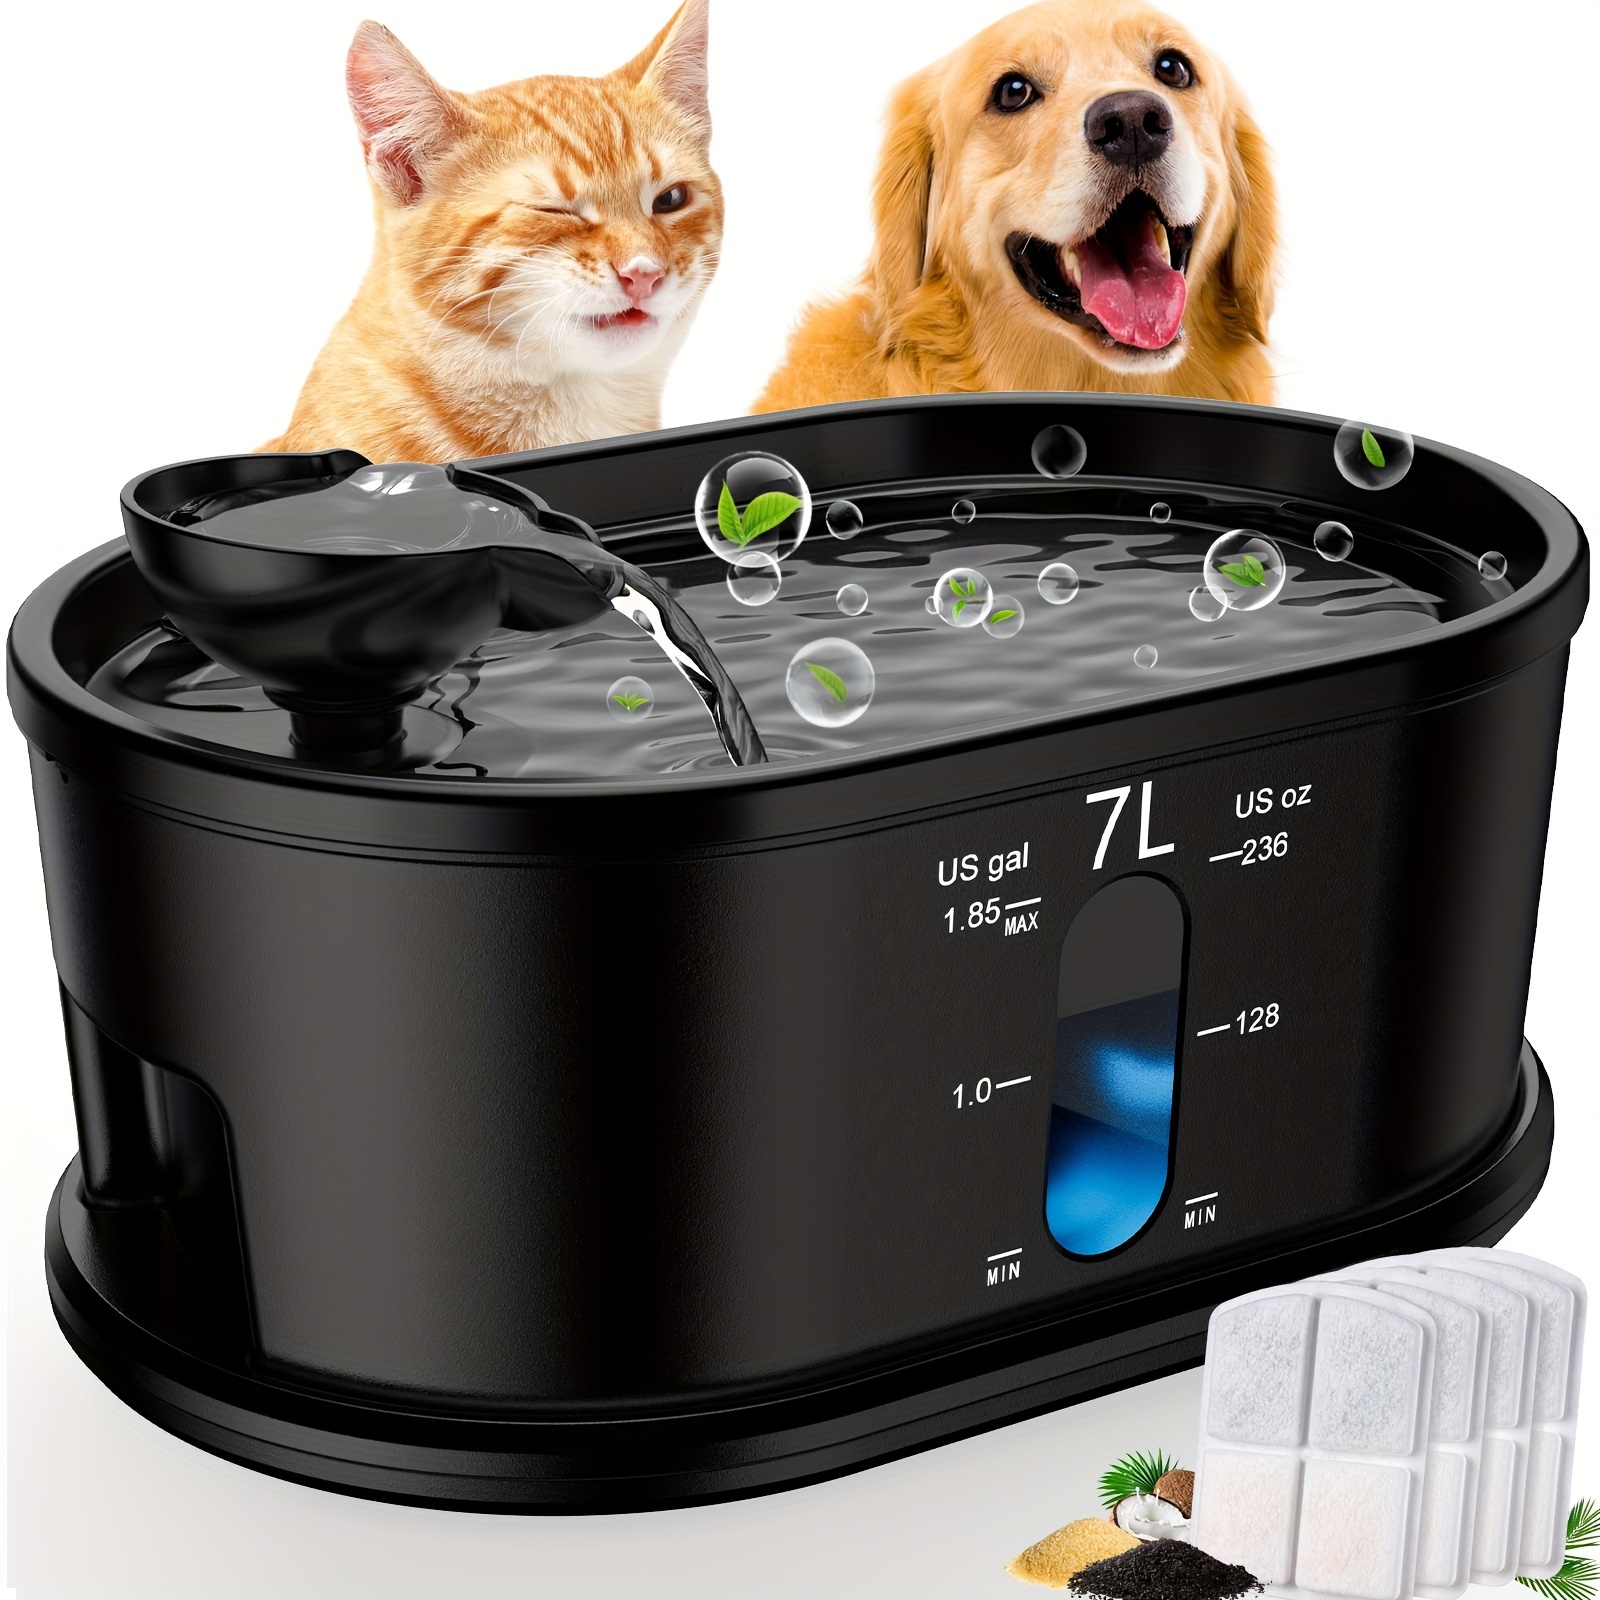 

Wireless Cat Water Fountain, Automatic Operated Pet Water Fountain, 95oz/7l Rechargeable Cordless Cat Water Dispenser, Black